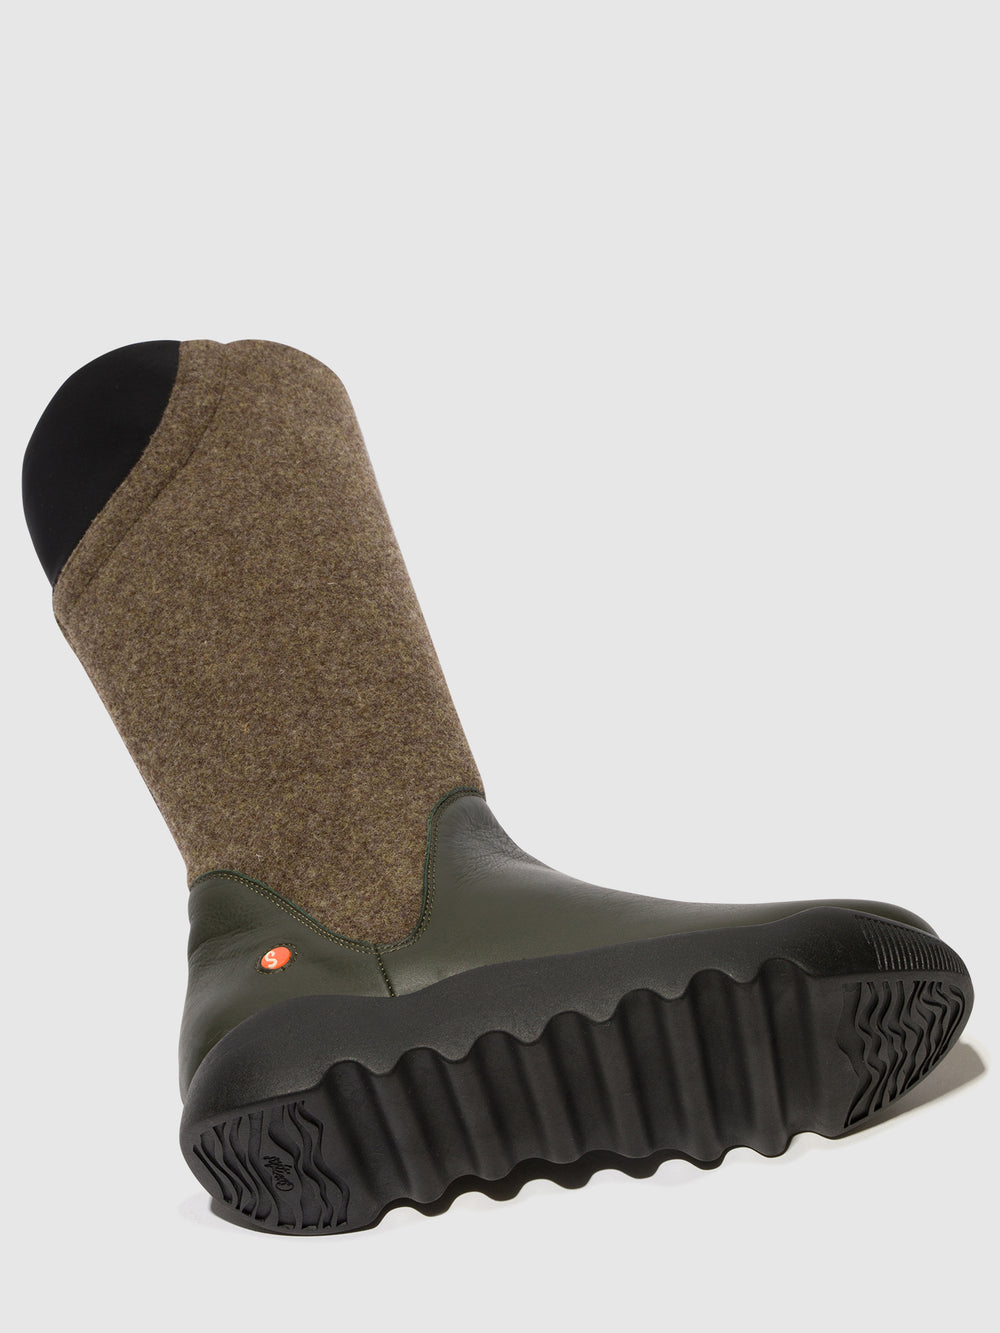 Zip Up Boots WEIL726SOF MILITARY W/DK.TAUPE FELT